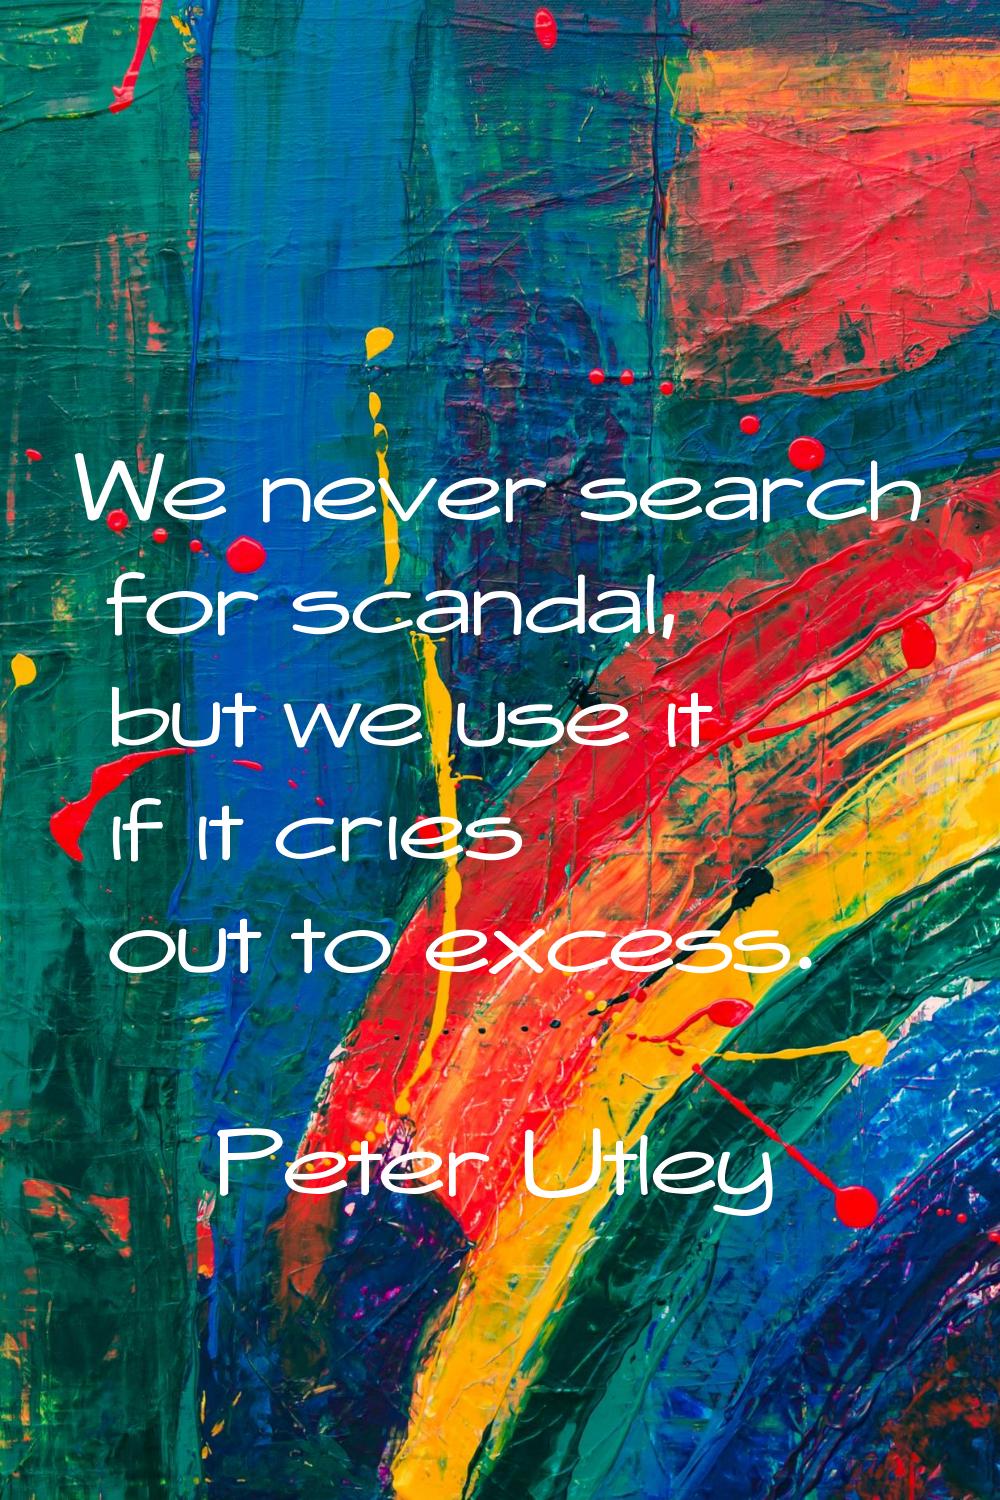 We never search for scandal, but we use it if it cries out to excess.